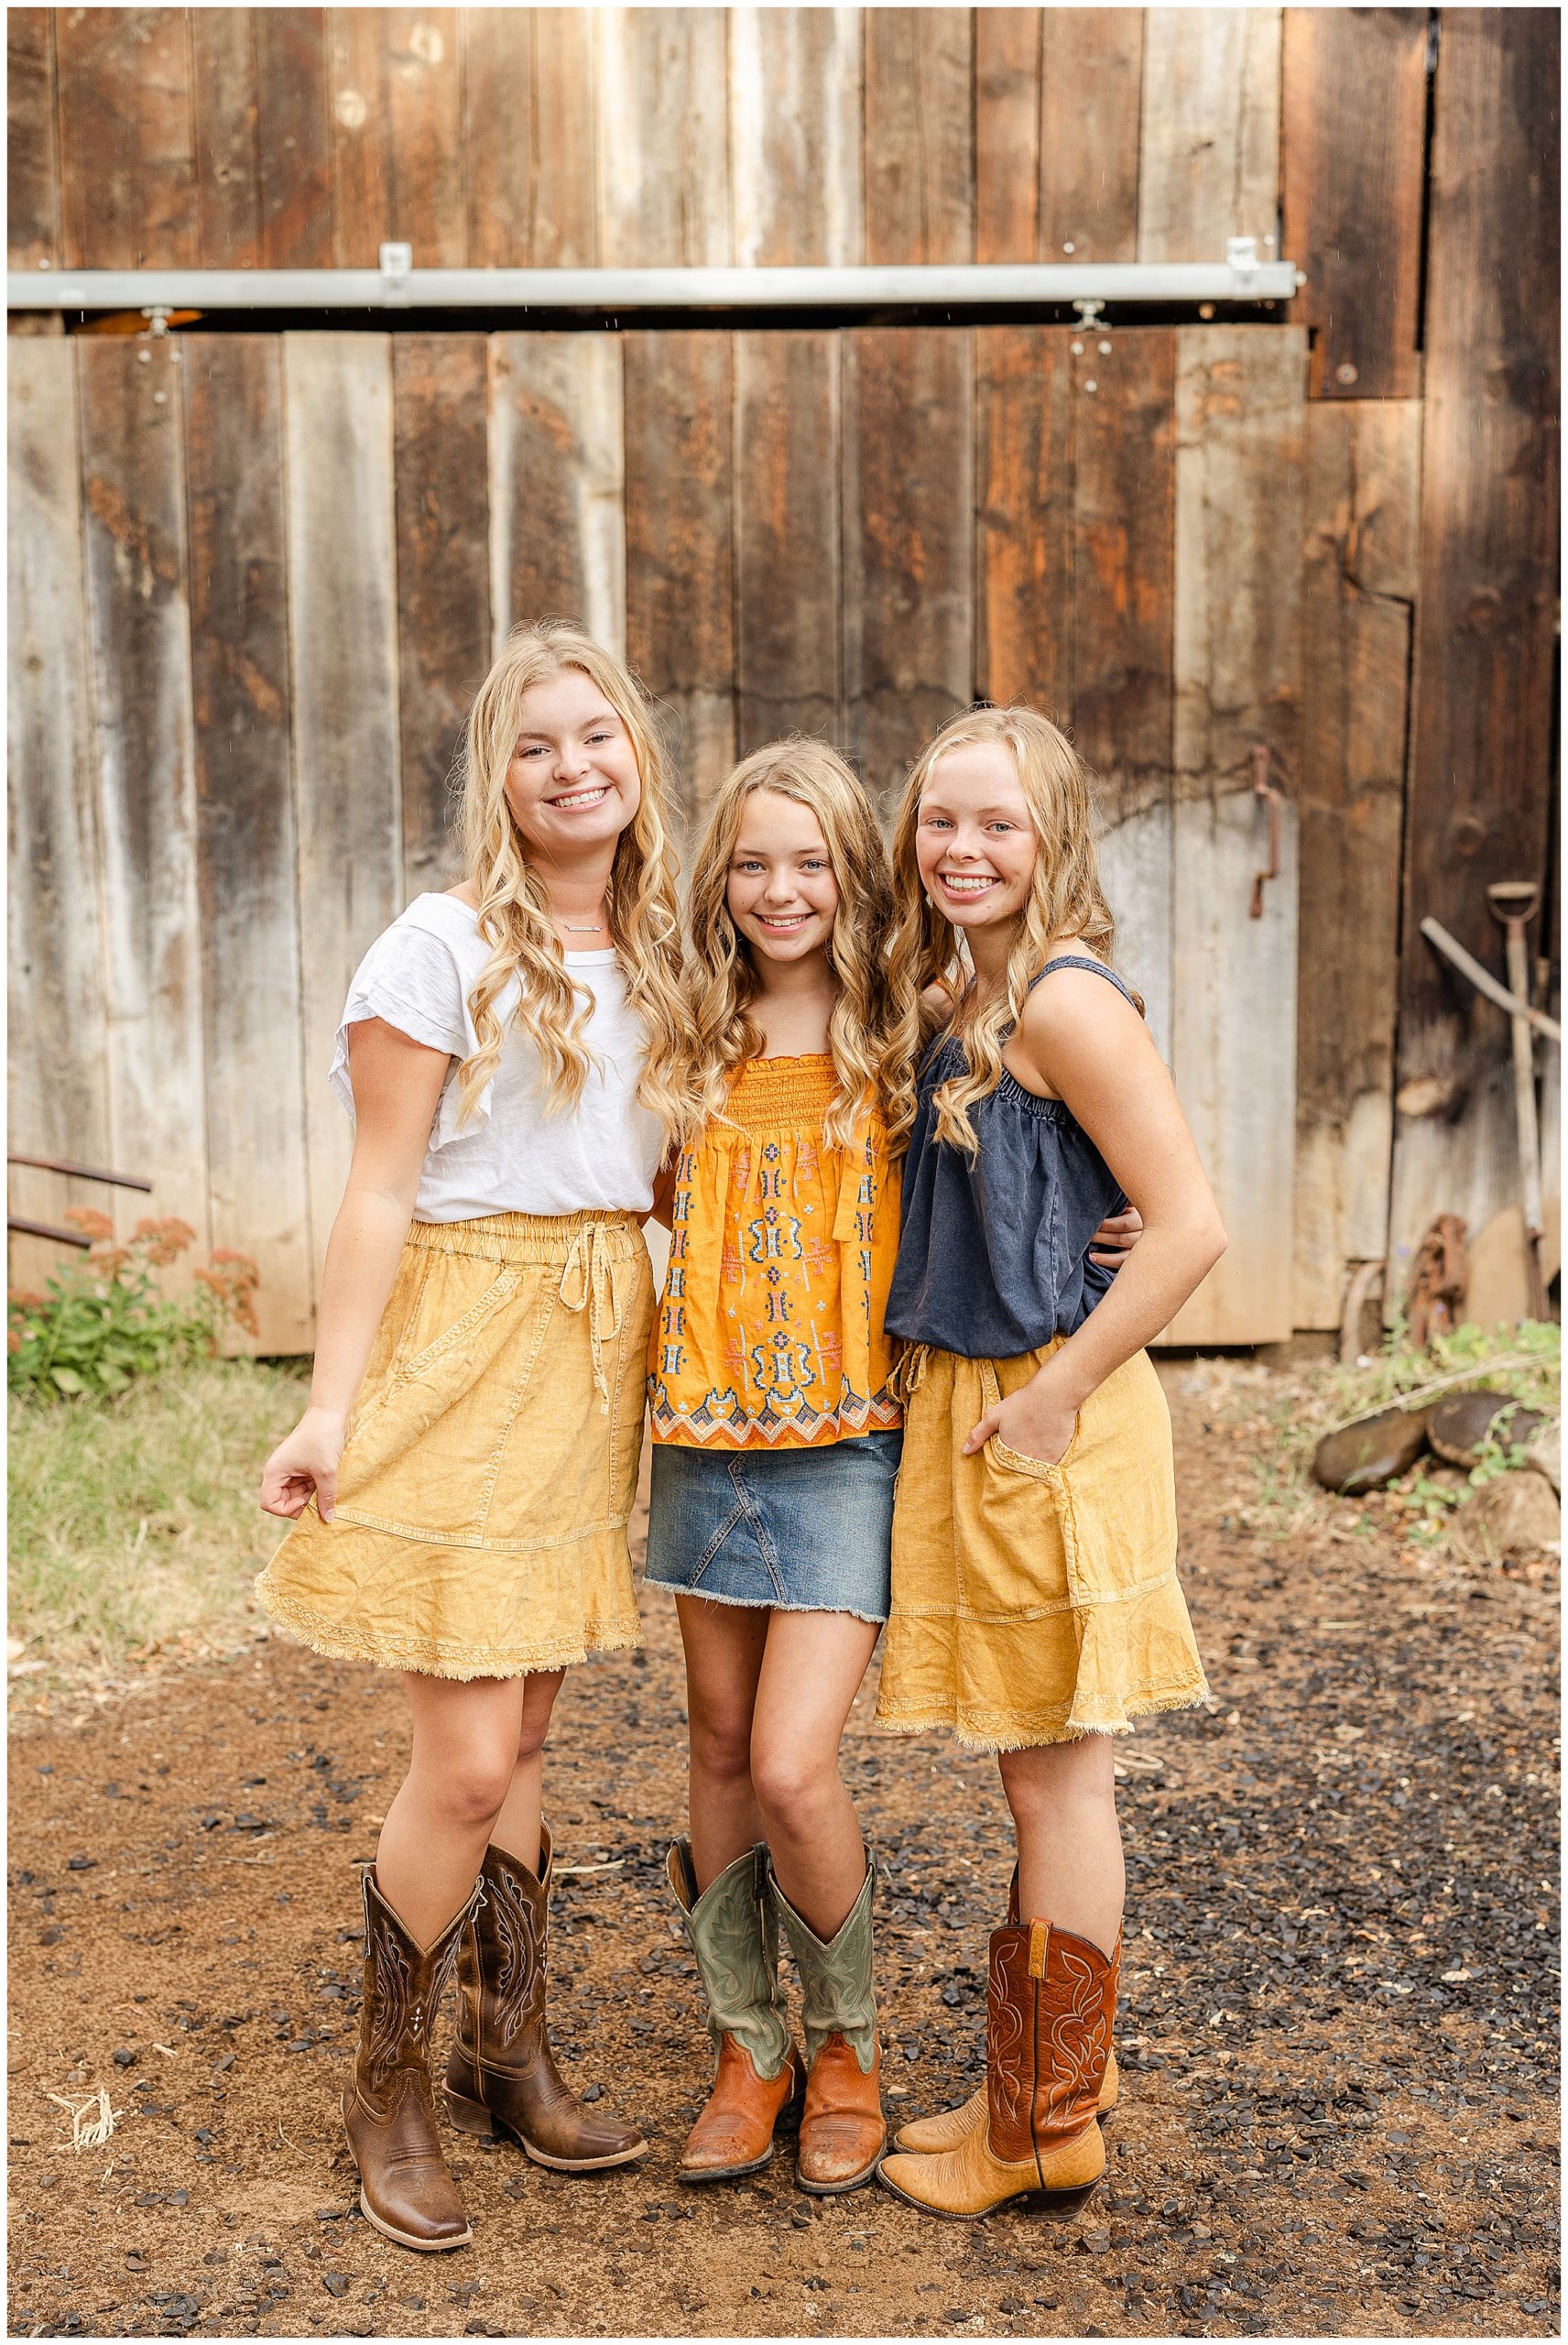 White Ranch Events Country Sisters at Barn with Boots | Christy + Girls